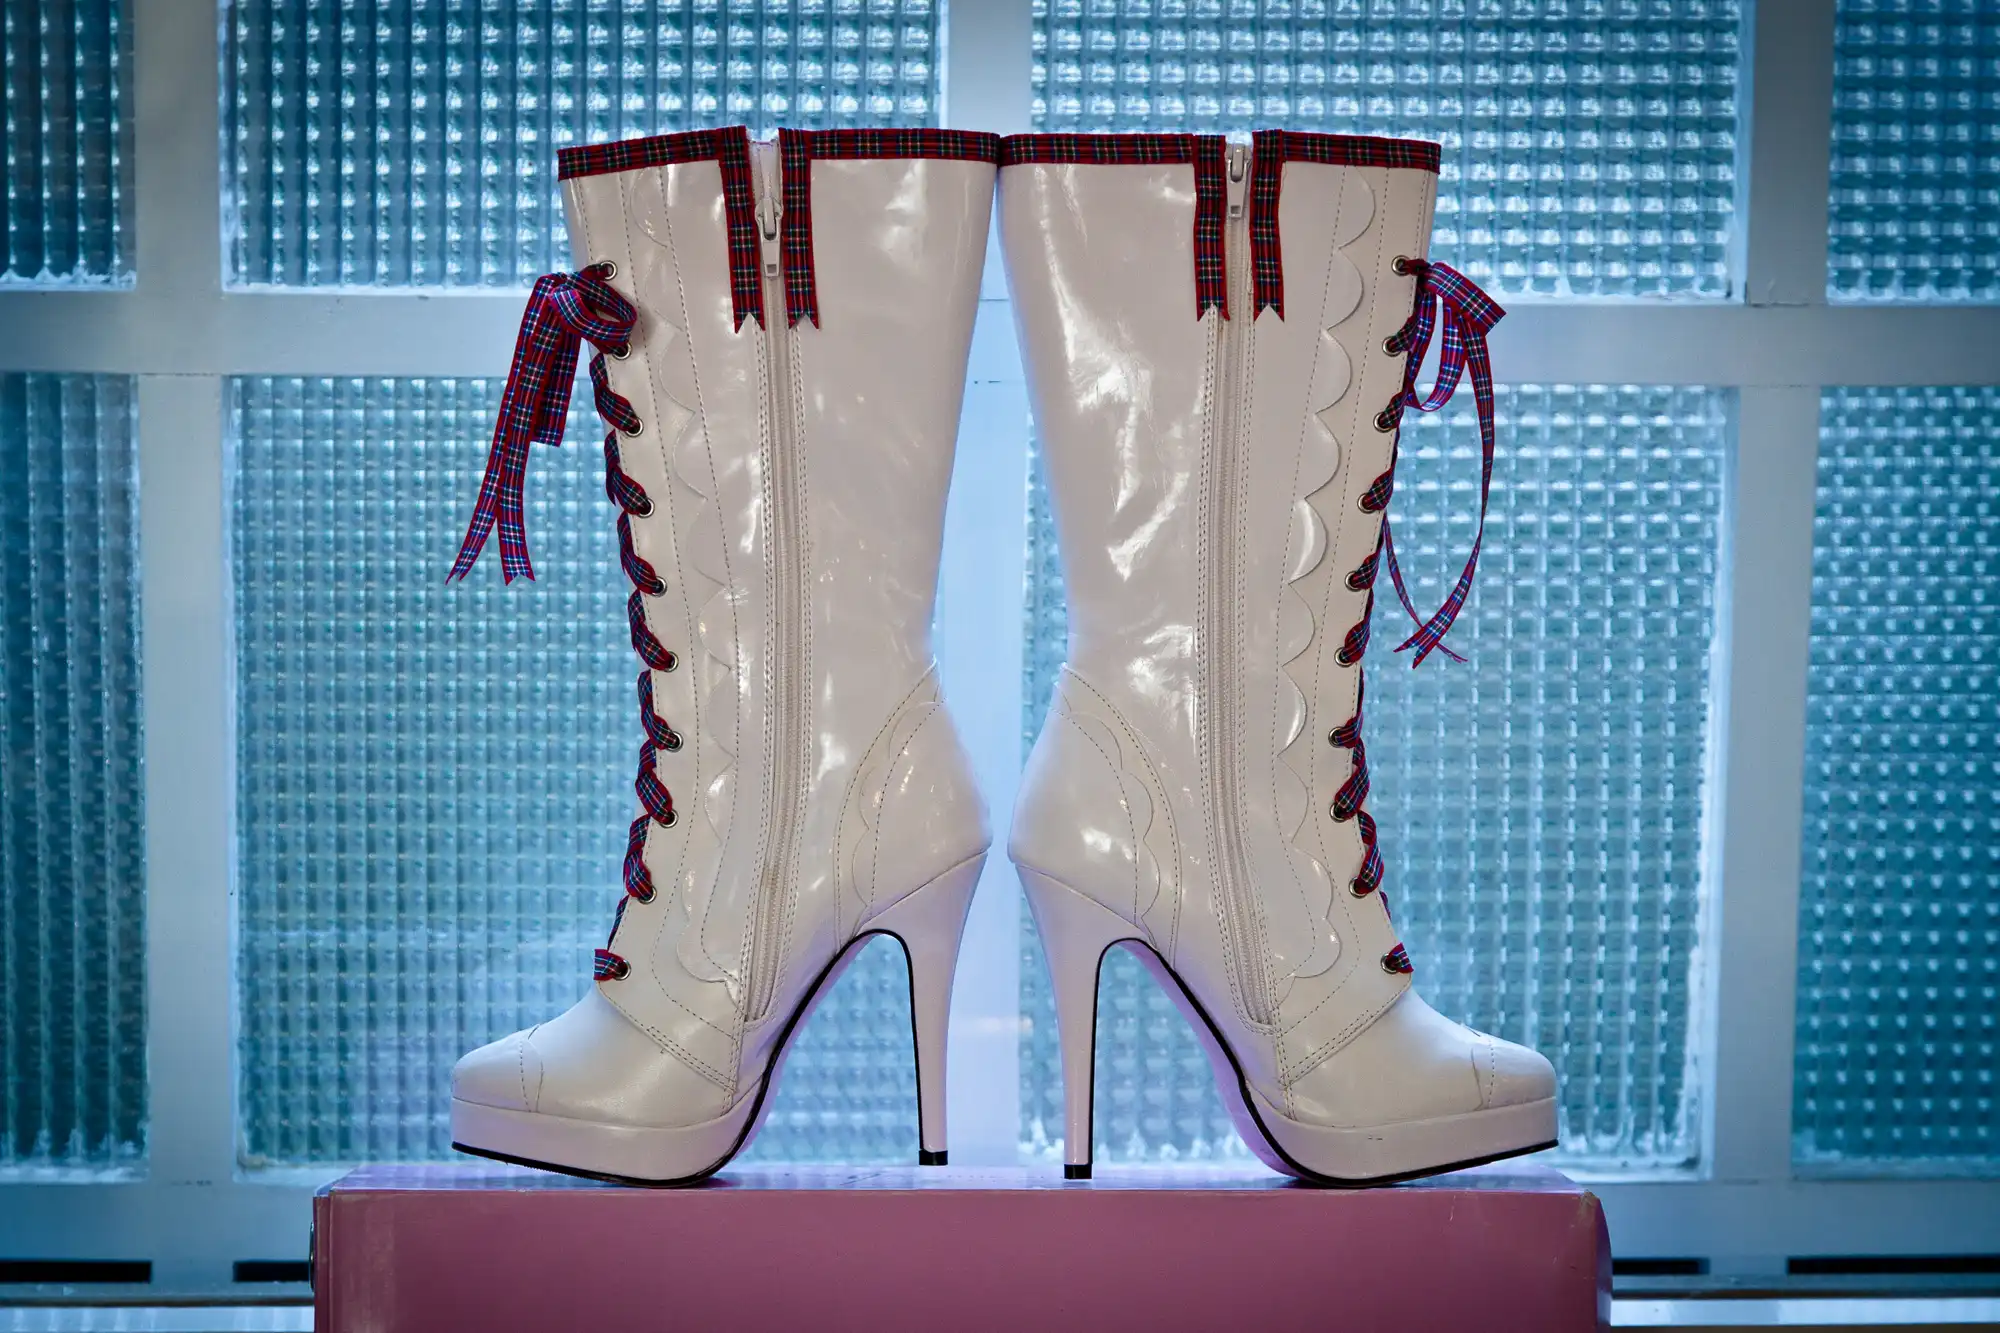 White high-heeled boots with red laces and details, displayed against a translucent blue backdrop.